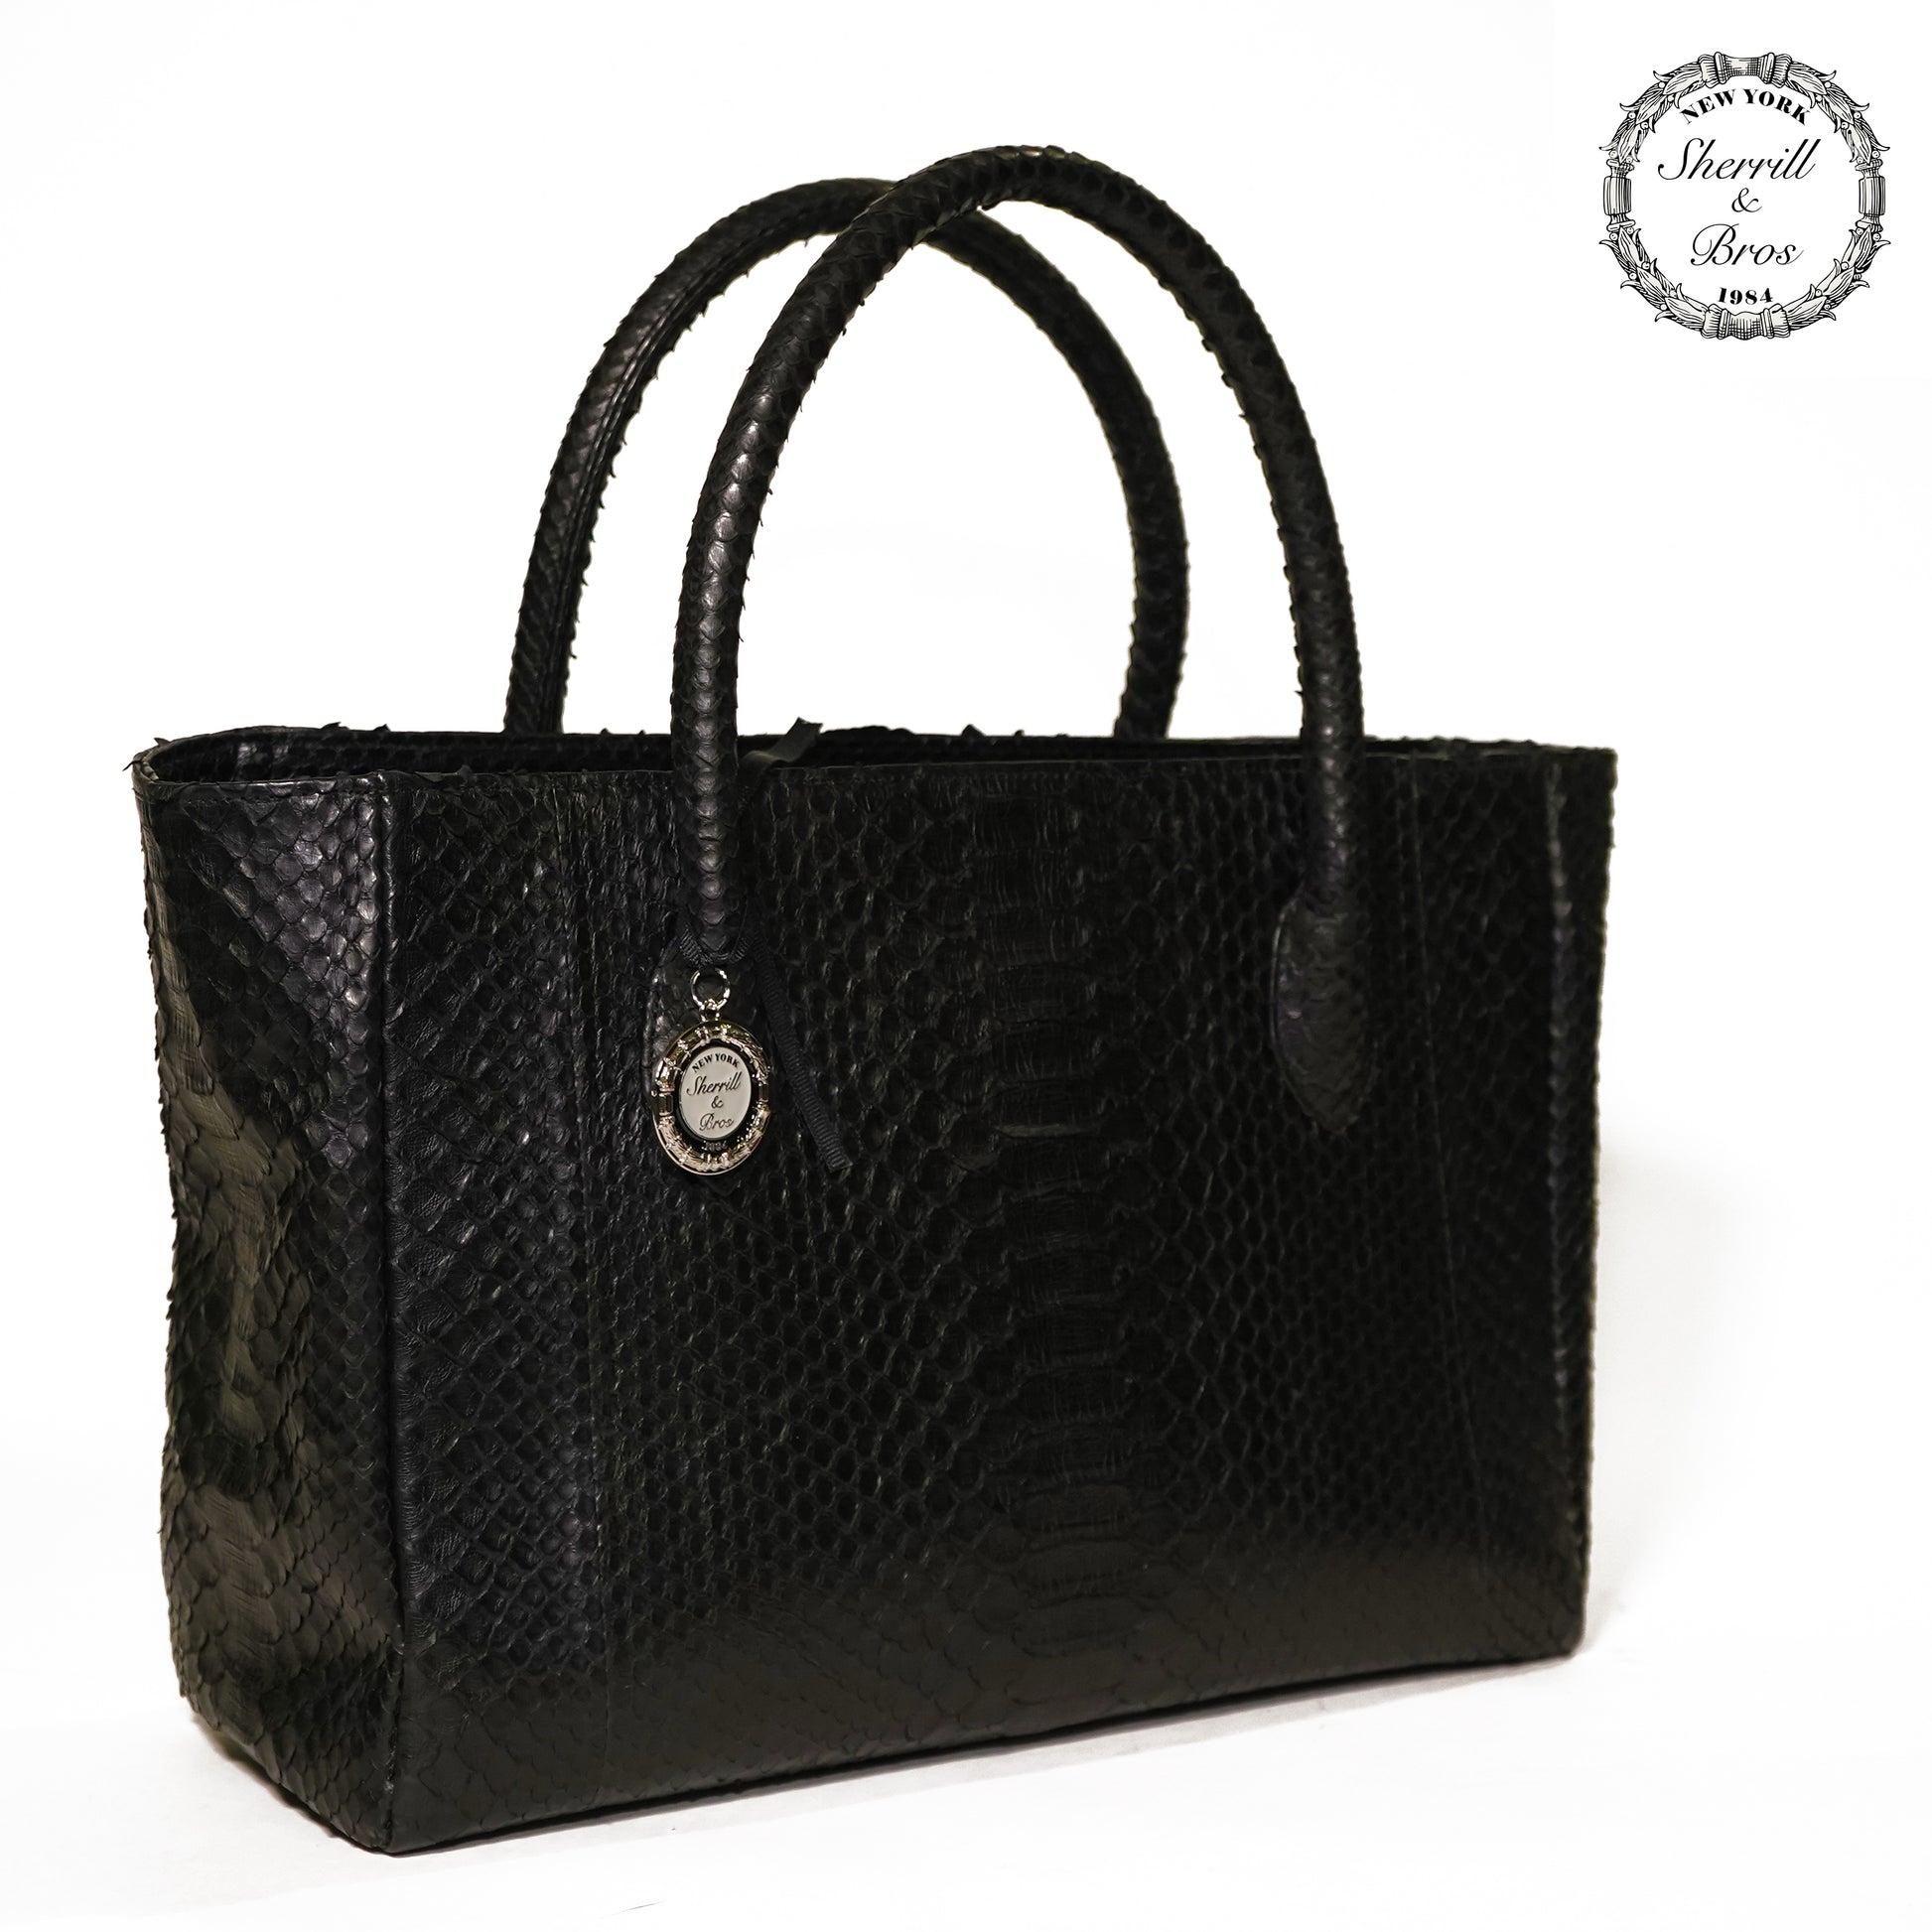 Affordable luxury bags for women 